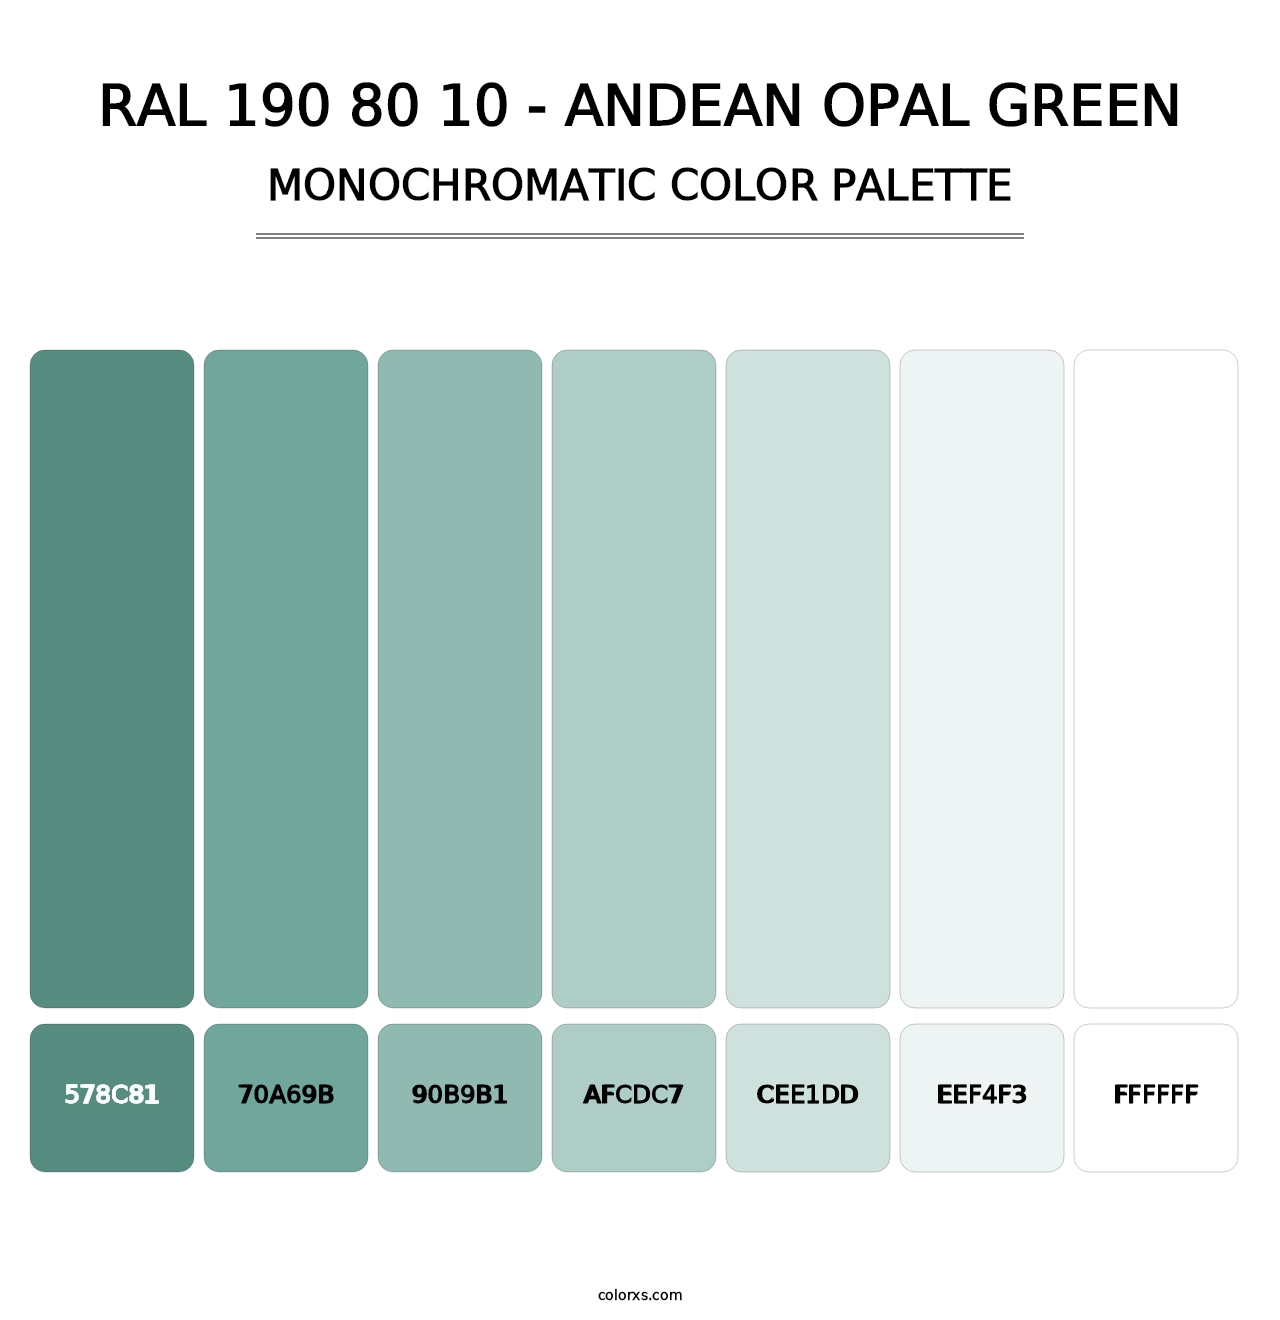 RAL 190 80 10 - Andean Opal Green - Monochromatic Color Palette